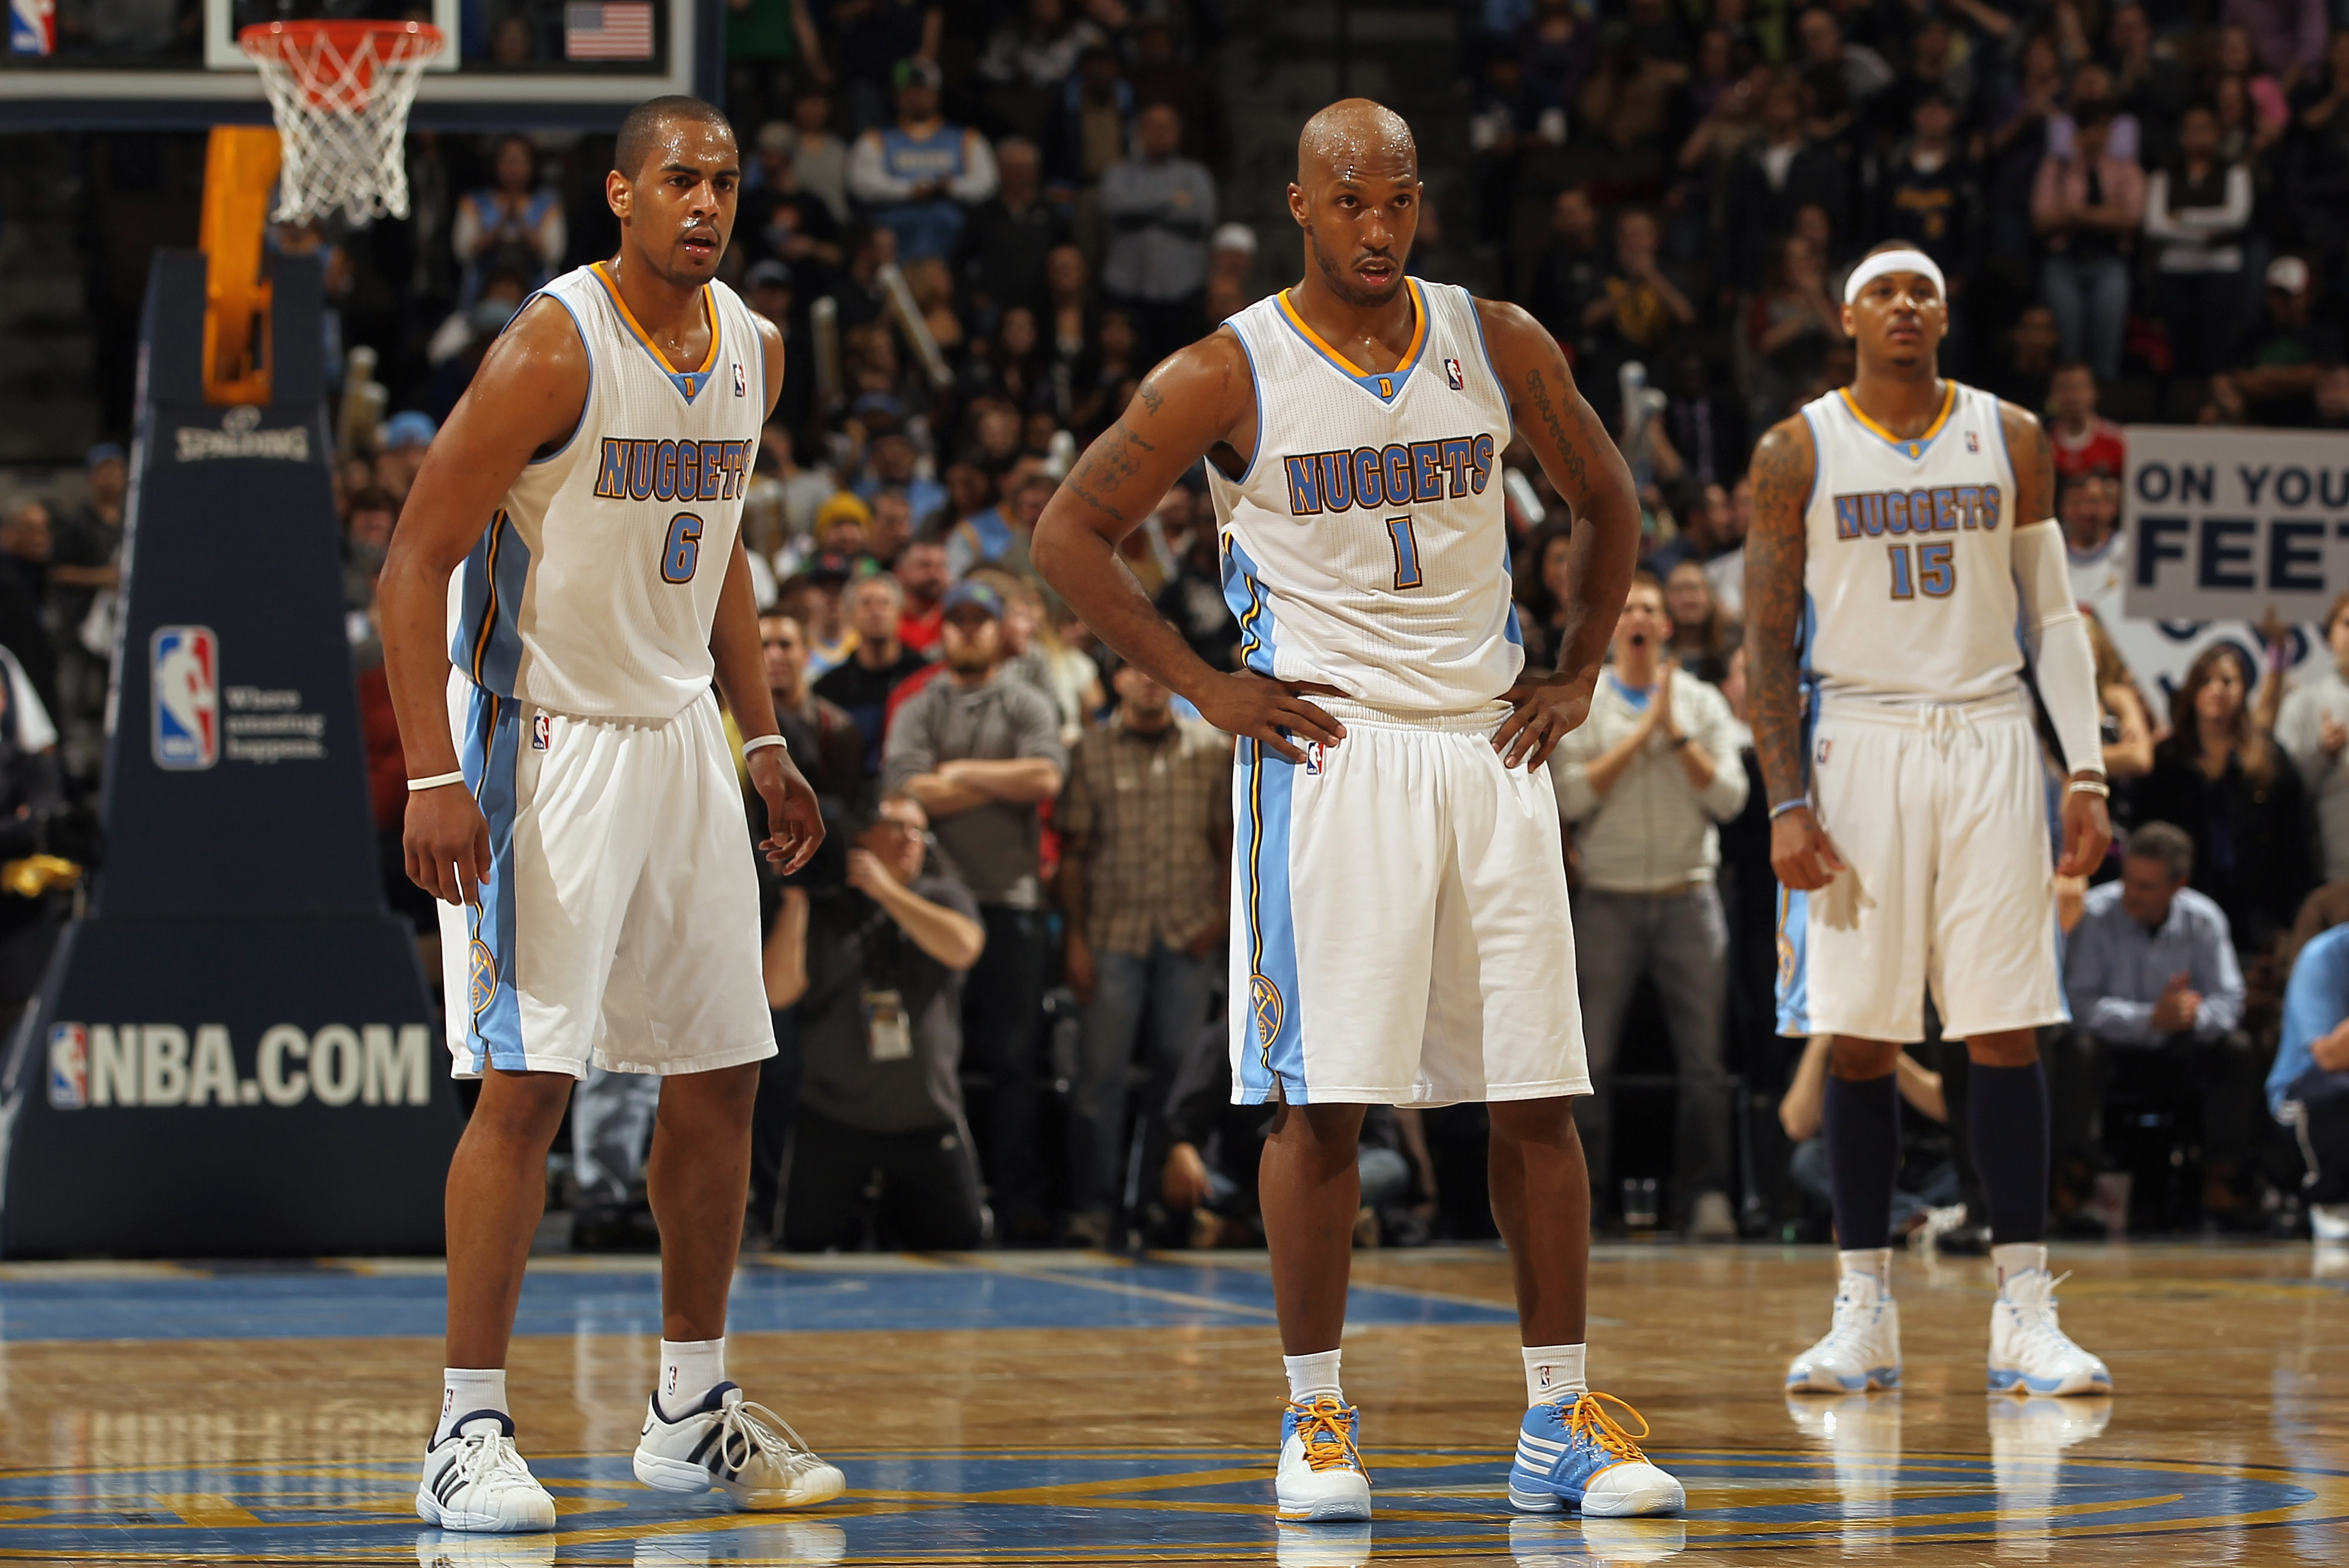 DENVER, CO - FEBRUARY 10:  Arron Afflalo #6, Chauncey Billups #1 and Carmelo Anthony #15 of the Denver Nuggets look on during a break in the action against the Dallas Mavericks during NBA action at the Pepsi Center on February 10, 2011 in Denver, Colorado